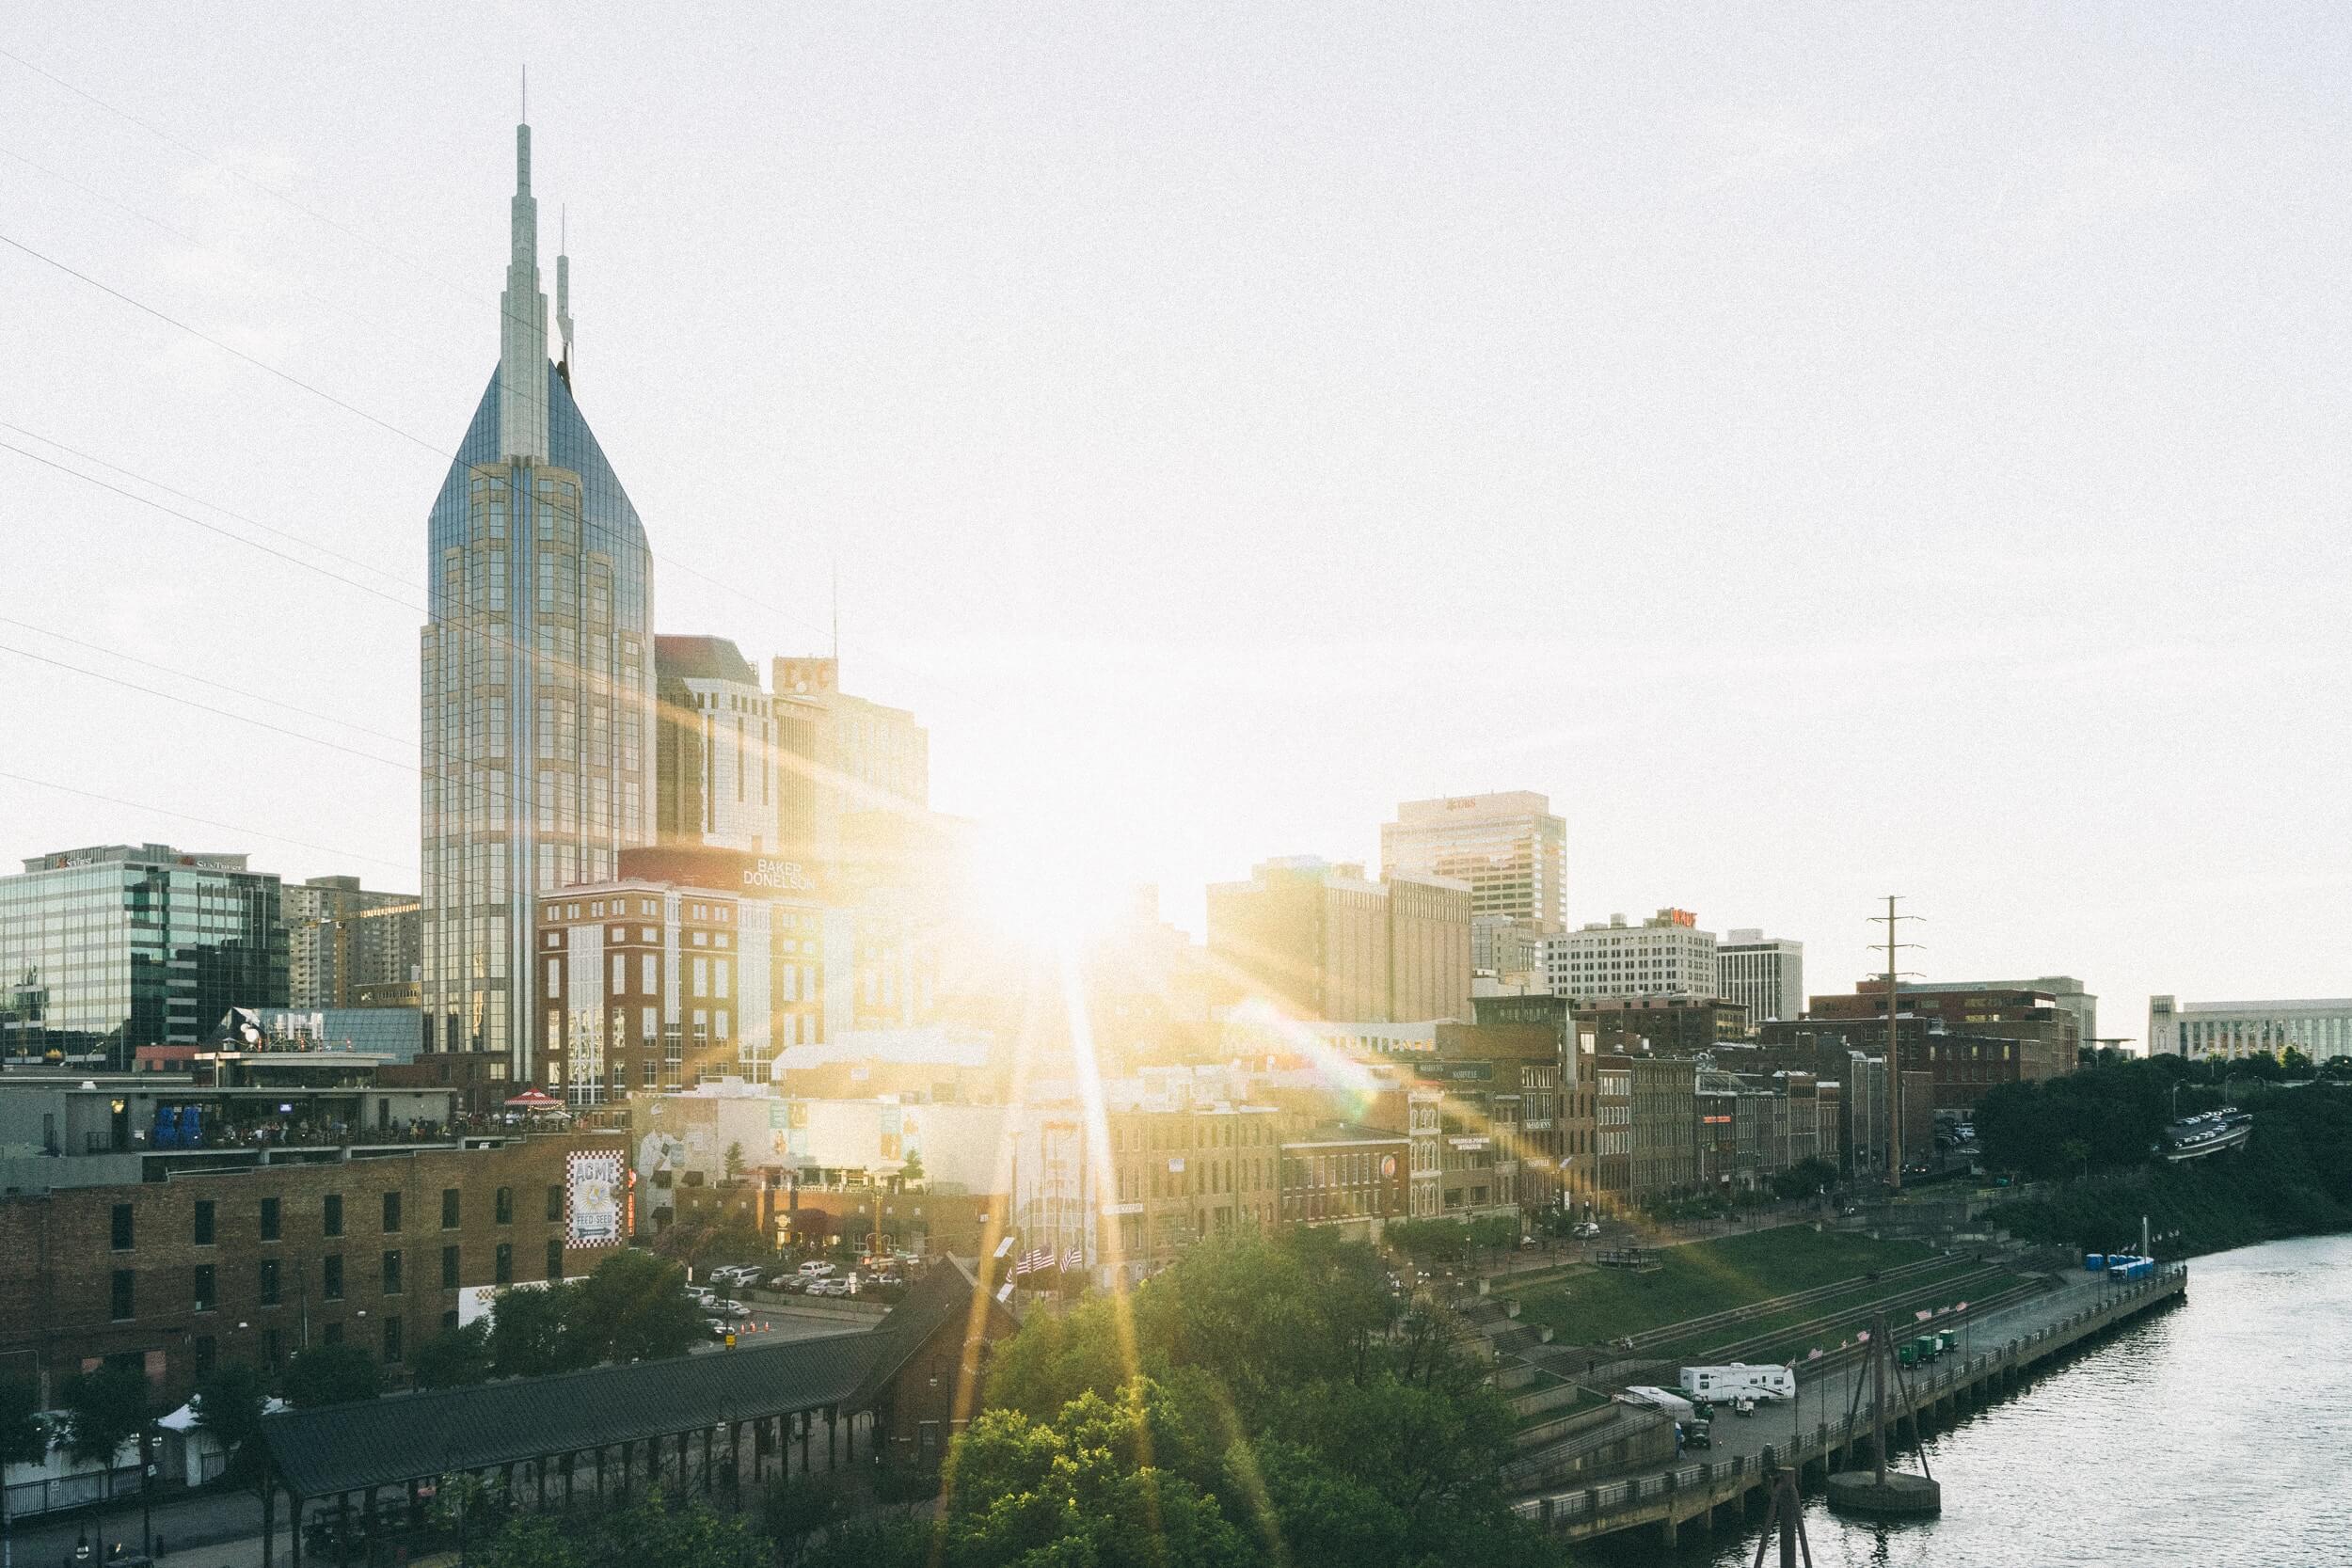 nashville skyline with sun beaming through the buildings and the at&t building stick out above all other buildings